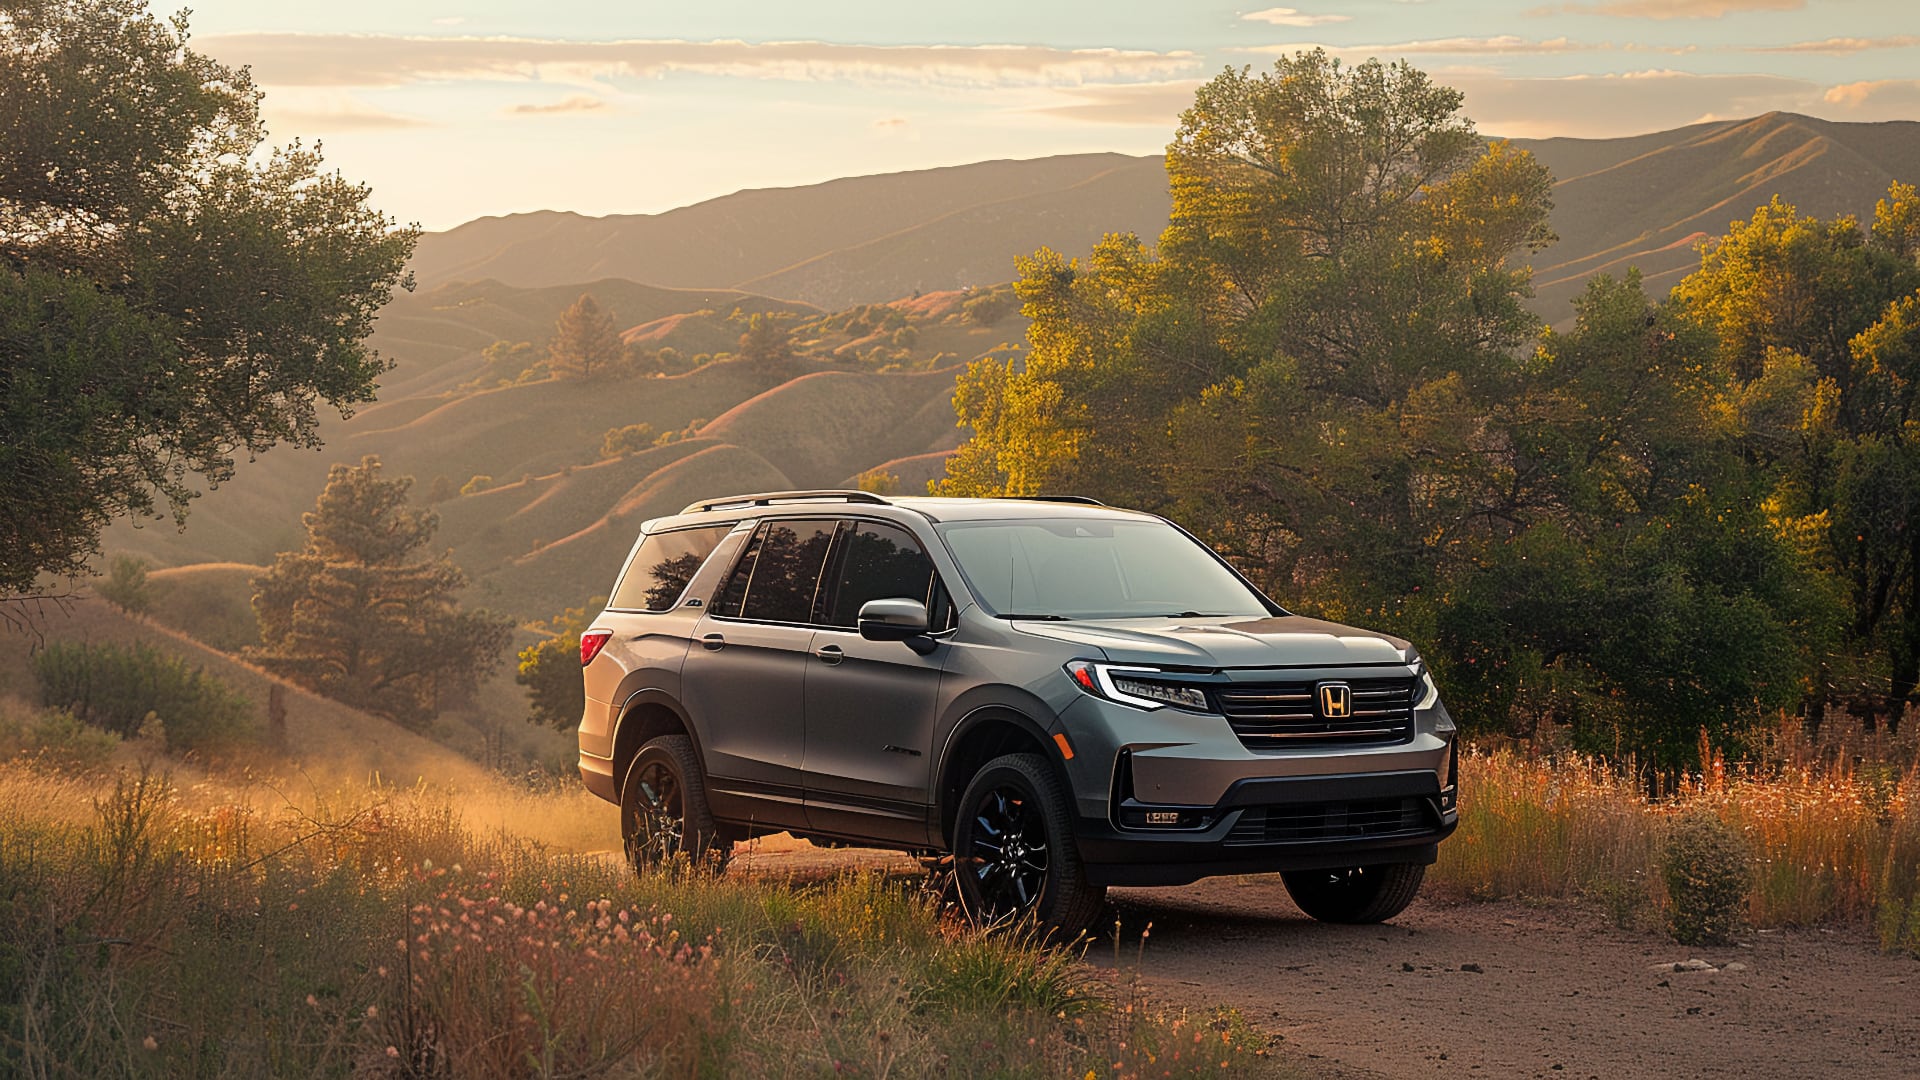 The 2020 Honda Pilot is moving down a dirt road.